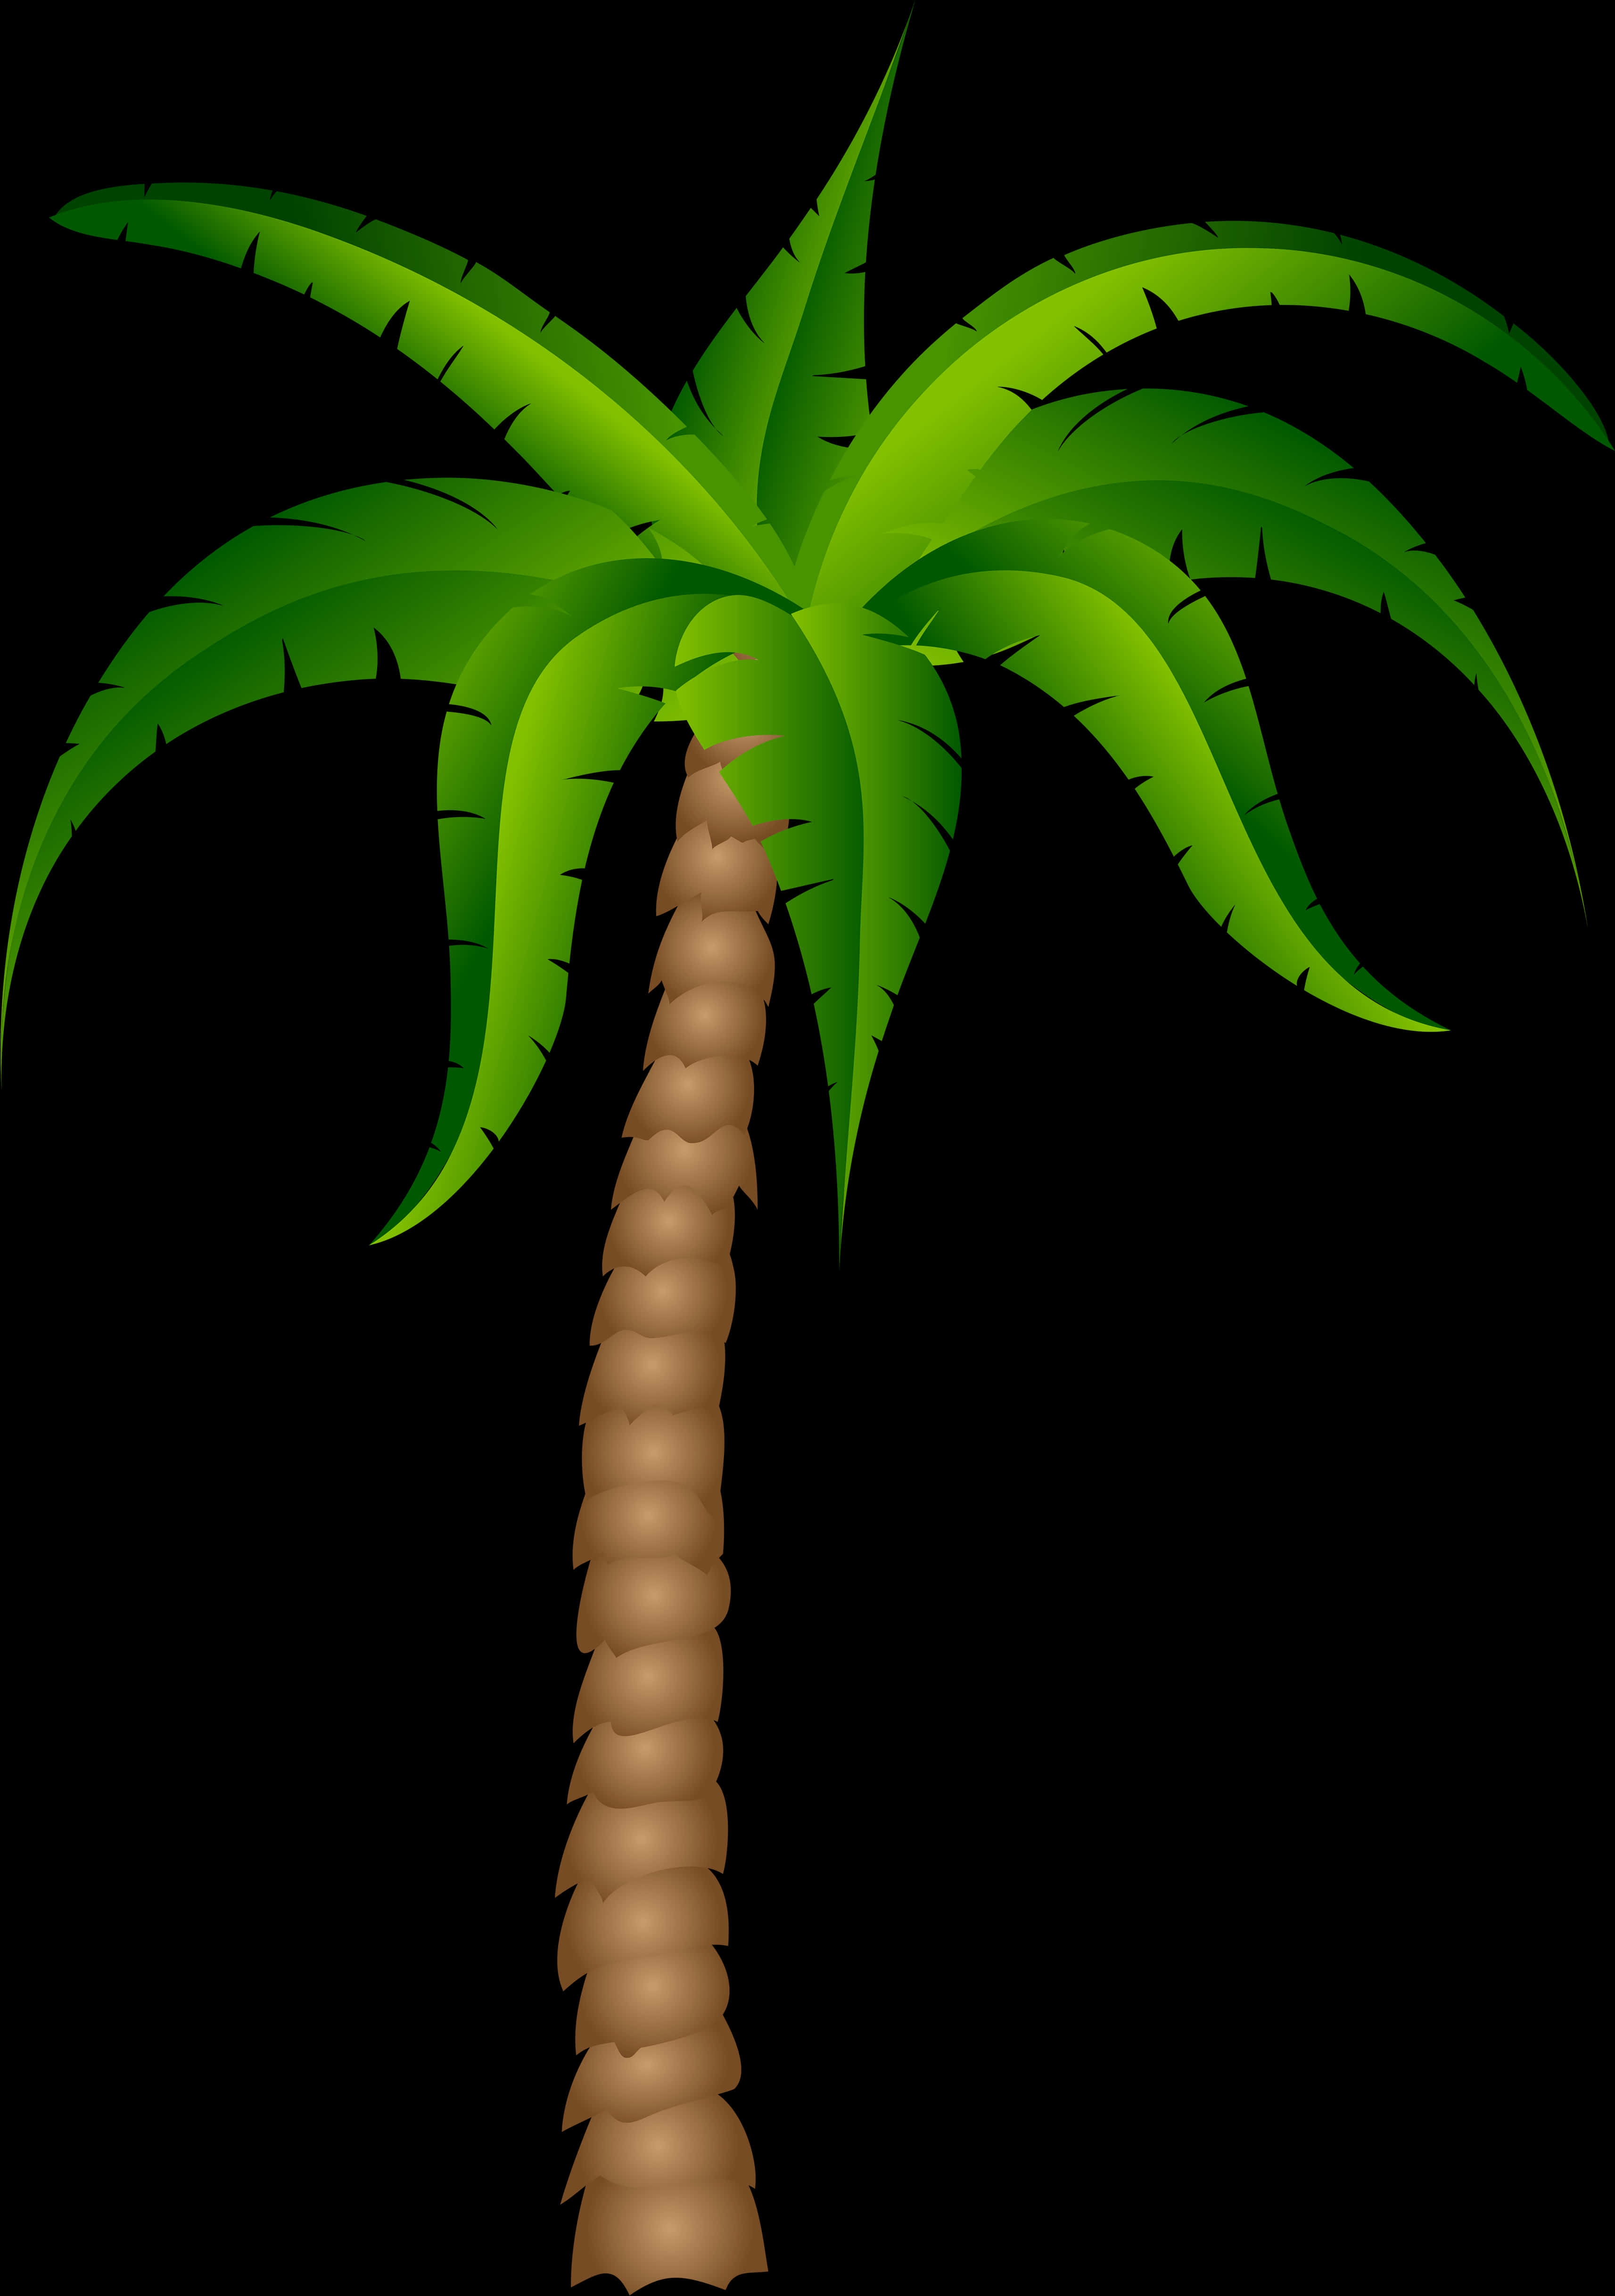 A Palm Tree With Green Leaves